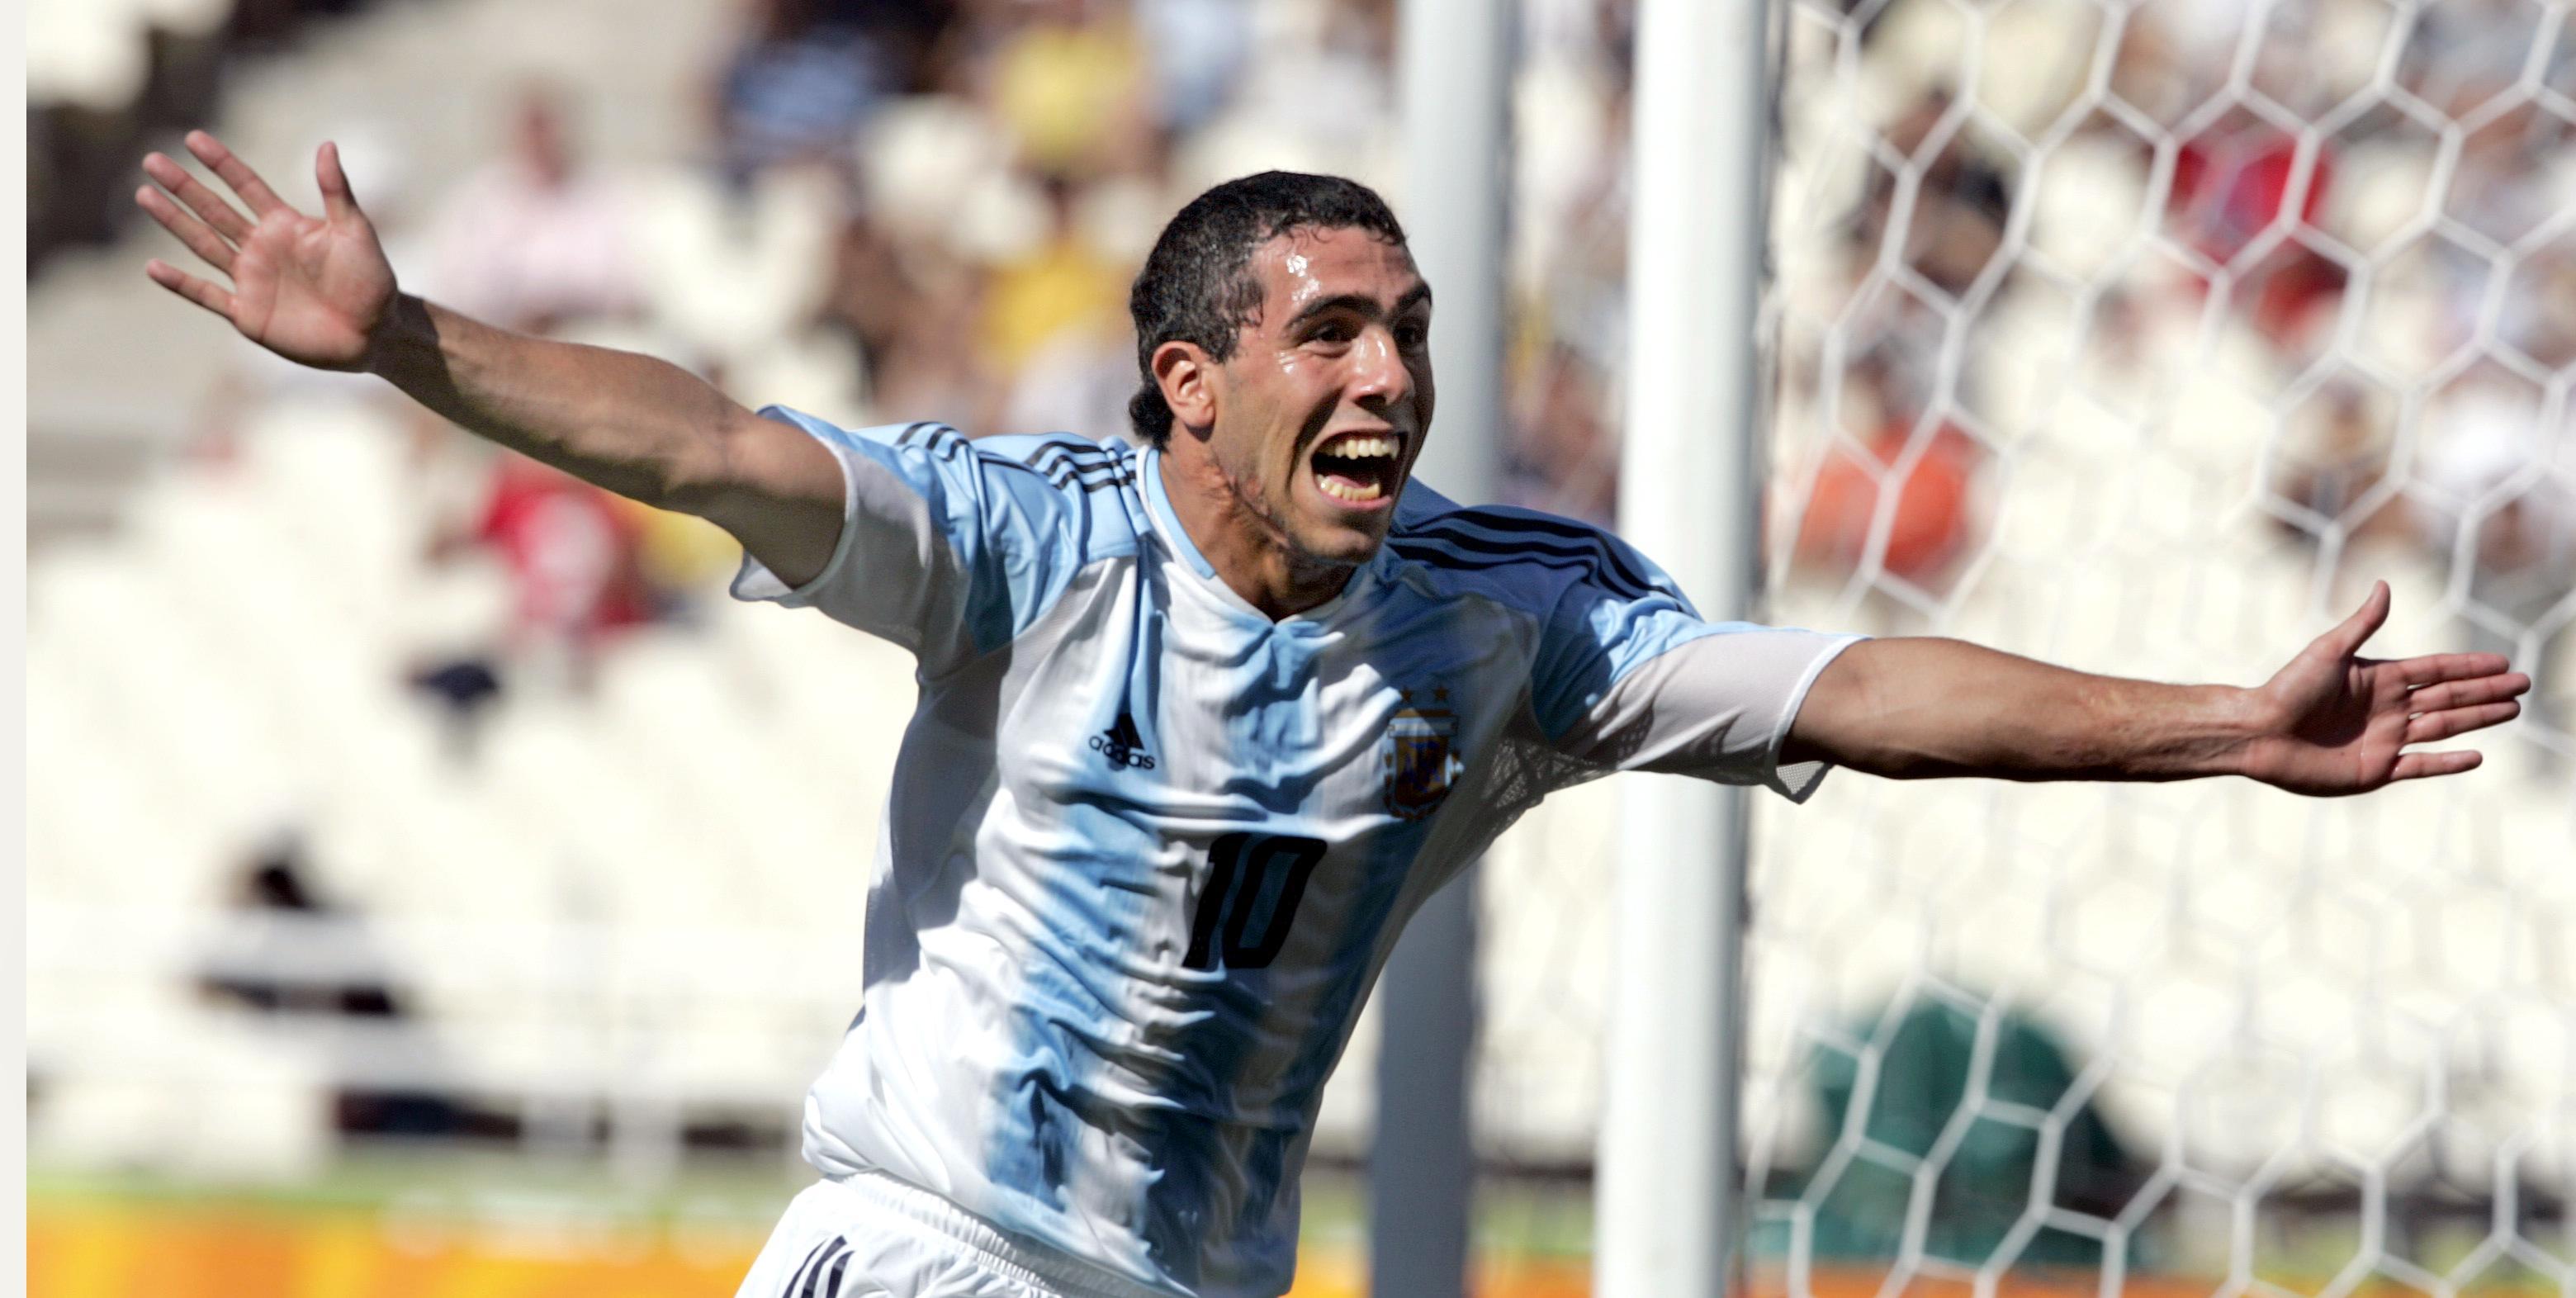 With Argentinian striker Carlos Tevez running the show in top form, the Turin club wont show any signs of slowing down. French midfielder Paul Pogba will be missed for the matches with an injury sidelining him for over a month, but with a healthy Arturo Vidal and Andrea Pirlo behind strikers Fernando Llorente and Alvaro Morata alongside Tevez, Monaco may be ending their Cinderella story in the quarterfinals.
Photo courtesy of TNS.